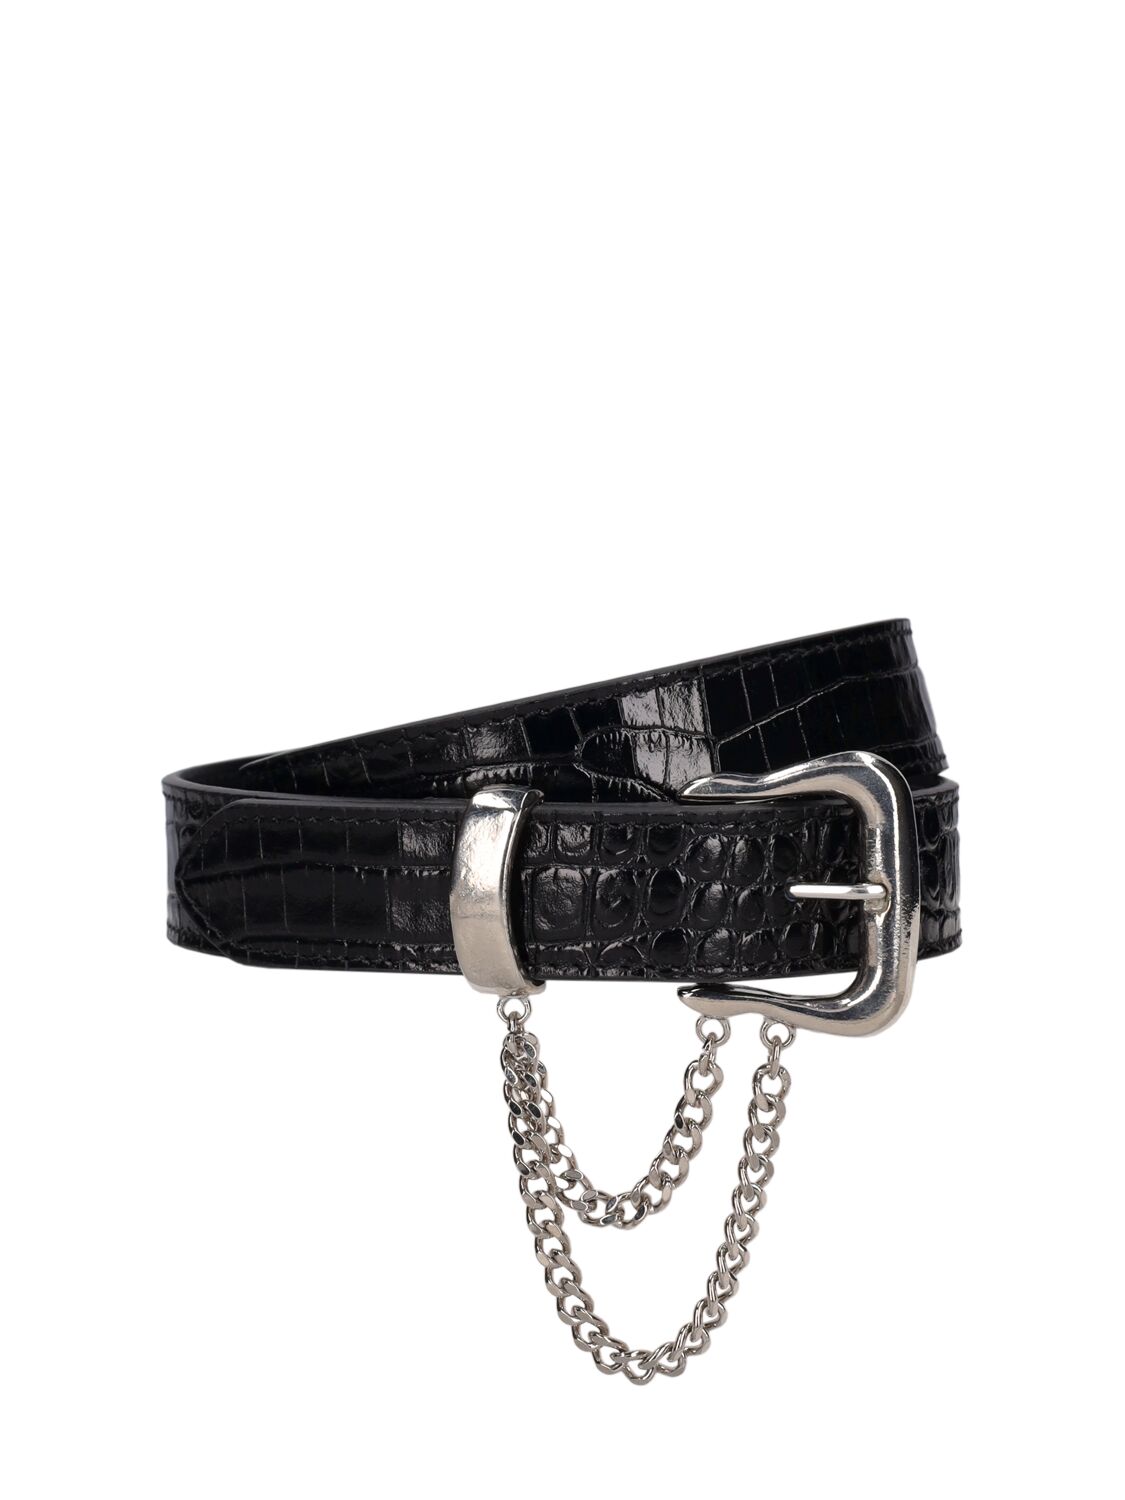 Alessandra Rich Embossed Leather Belt W/ Chain In Black,silver